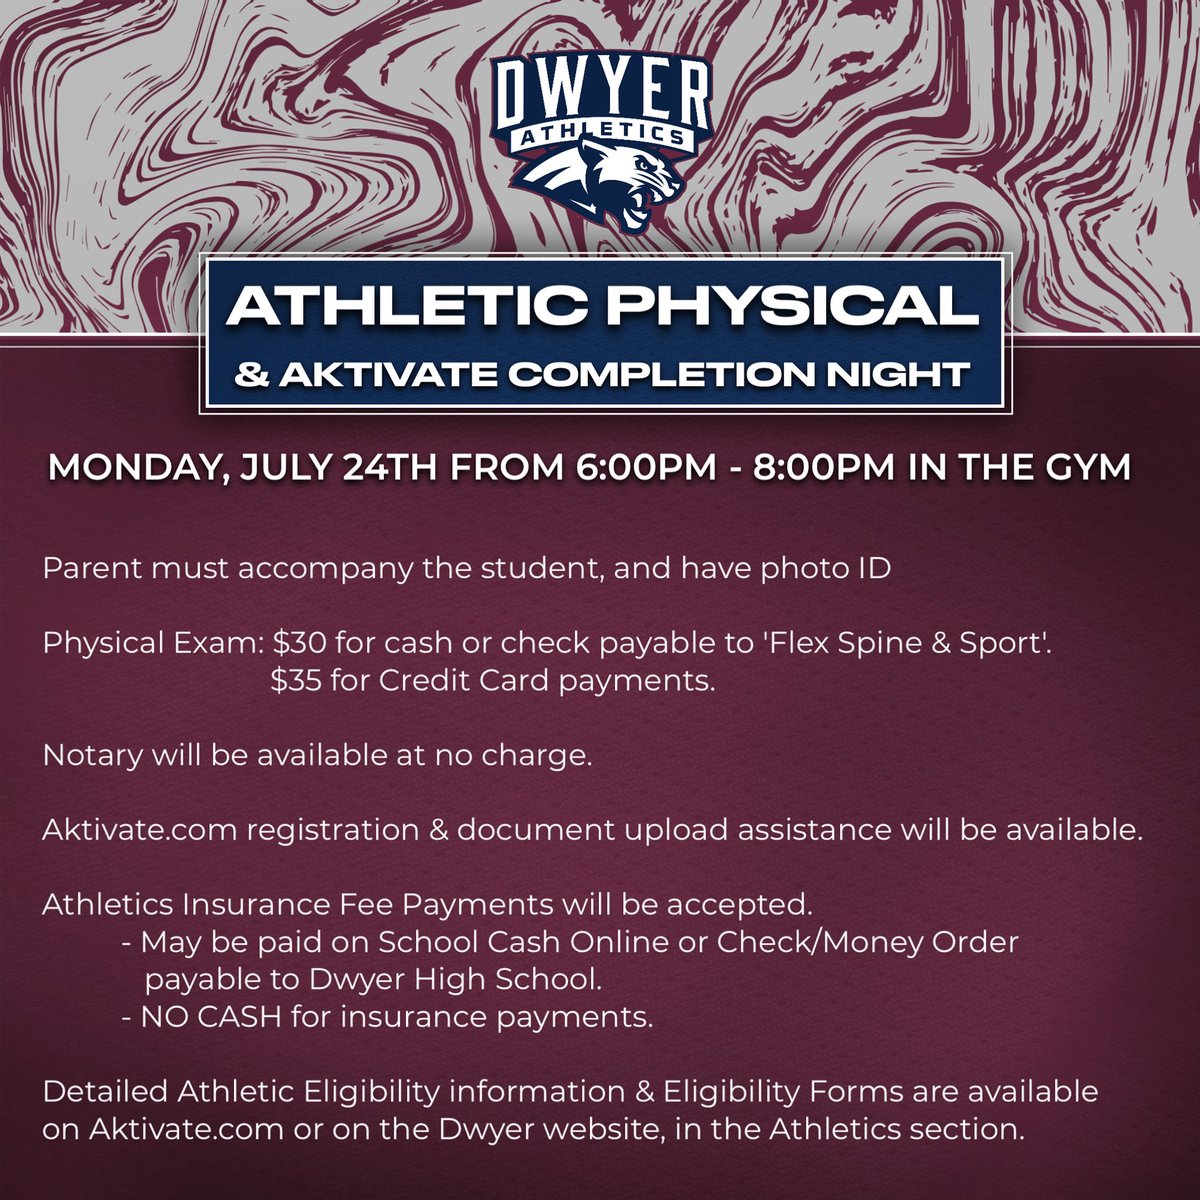 We are hosting an ATHLETICS PHYSICAL & AKTIVATE.COM ASSISTANCE NIGHT for Dwyer students next Monday, July 24th between 6pm– 8pm in the Dwyer Gym. See details in the picture, or contact our AD with any questions at: Thomas.Amenita@palmbeachschools.org